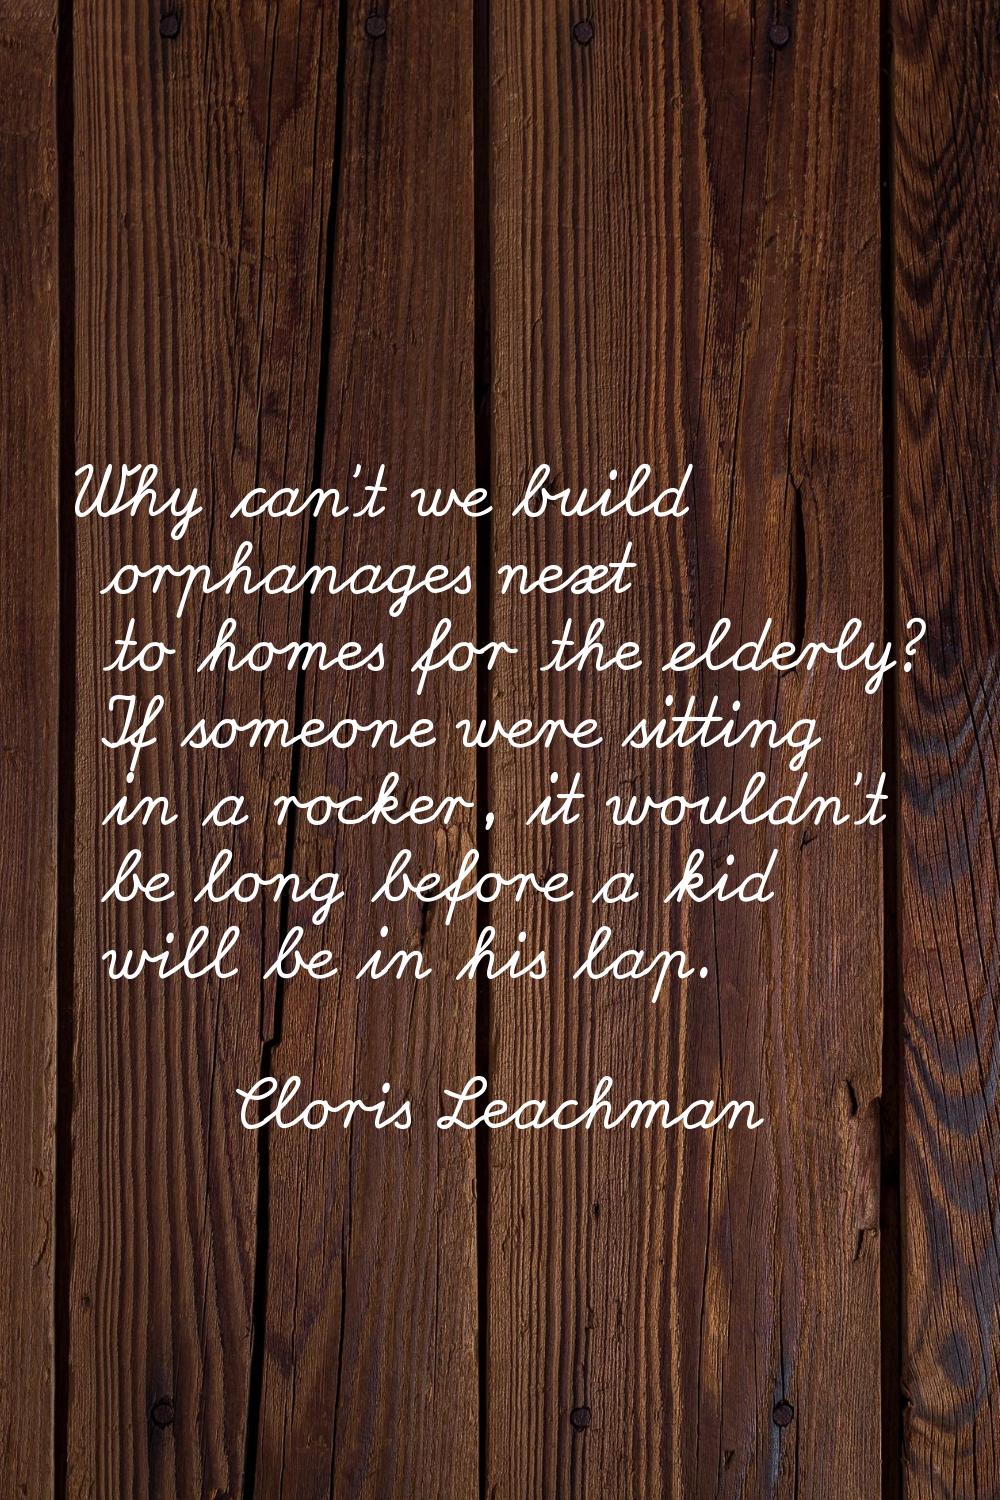 Why can't we build orphanages next to homes for the elderly? If someone were sitting in a rocker, i